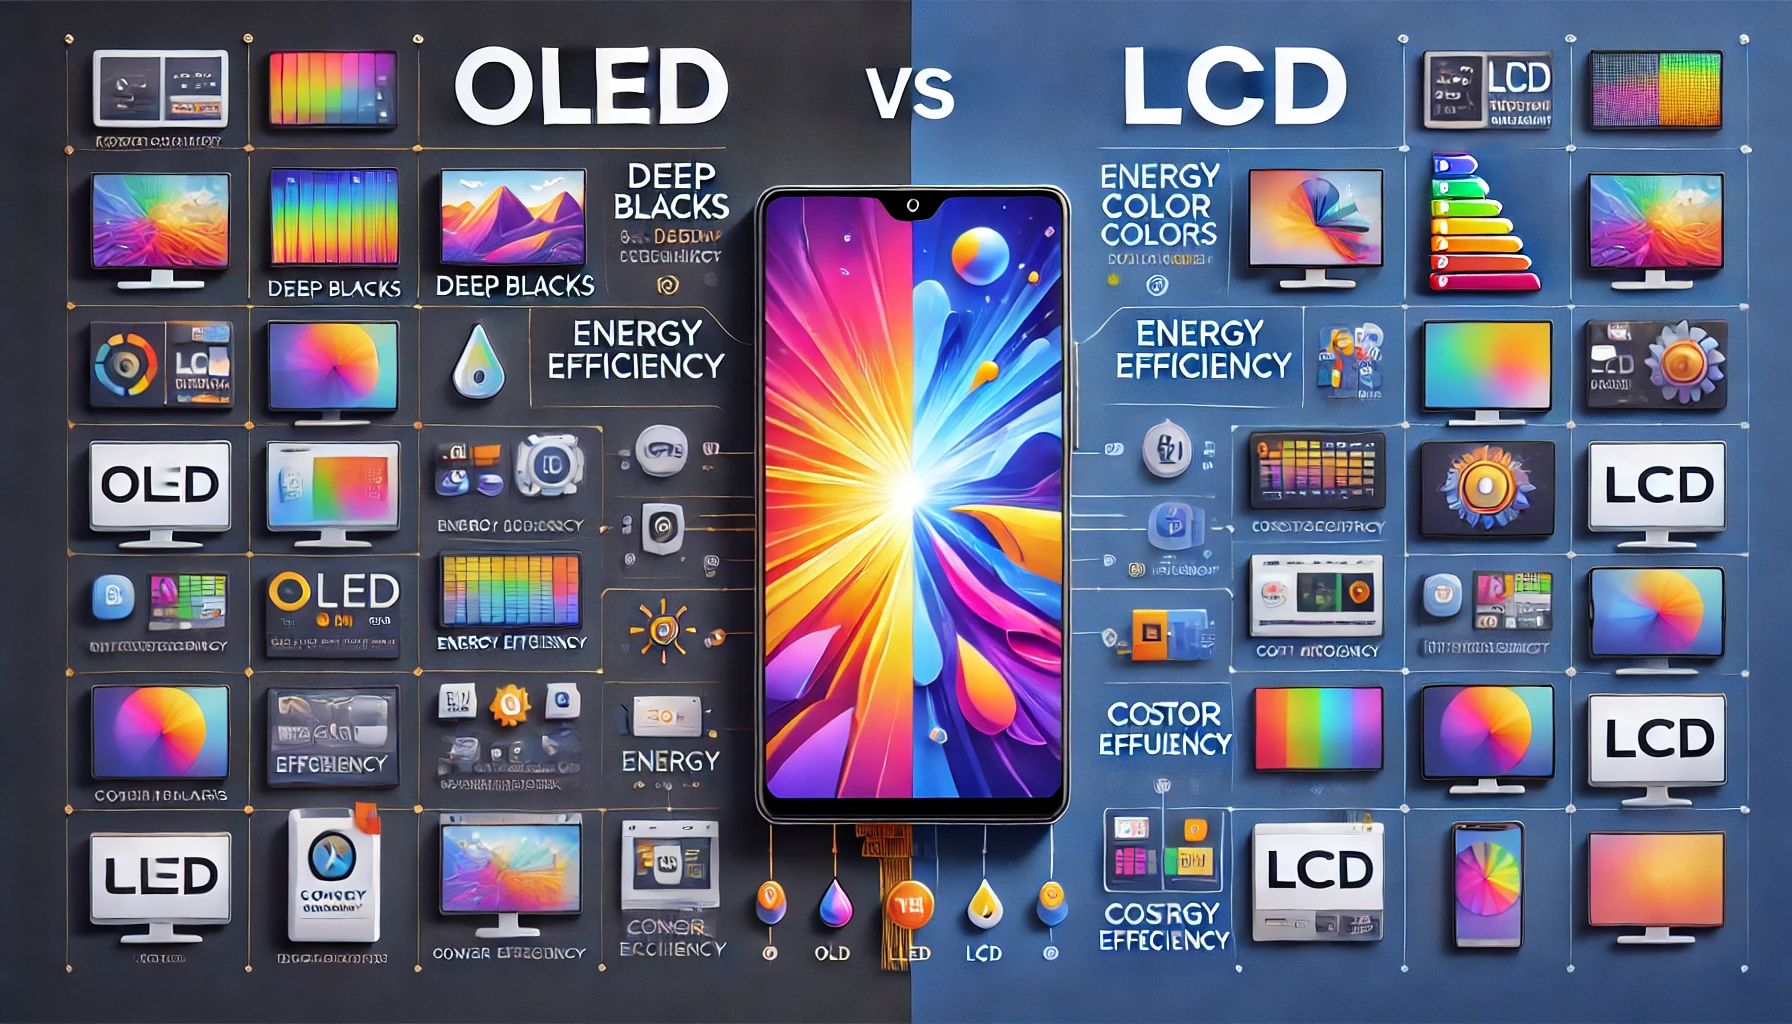 OLED vs LCD: Which Display Technology is Better for Mobile Devices?